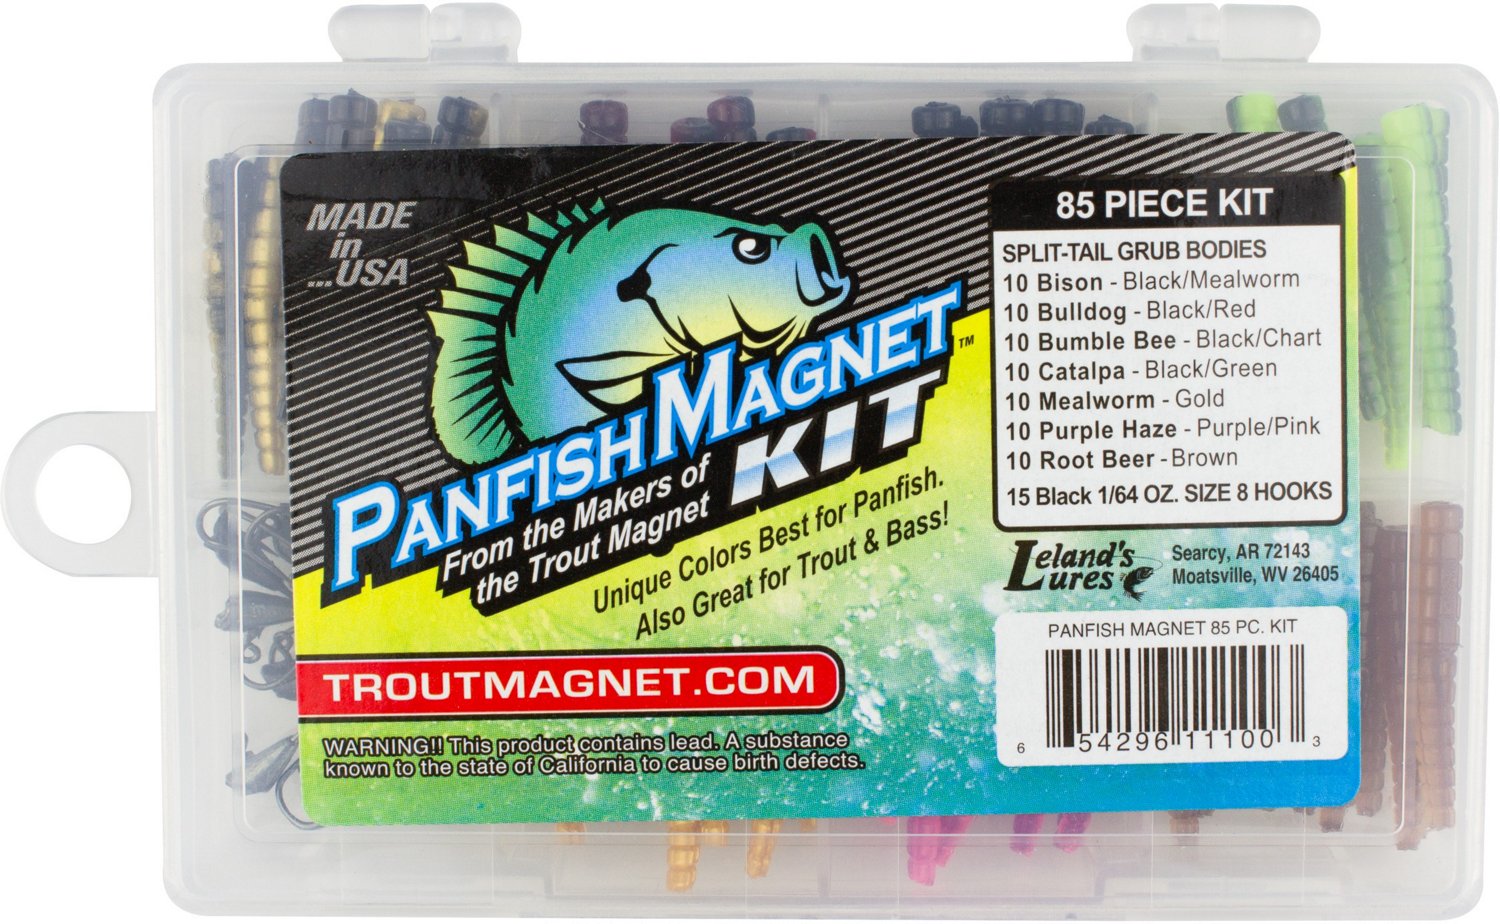 How to use a panfish magnet 